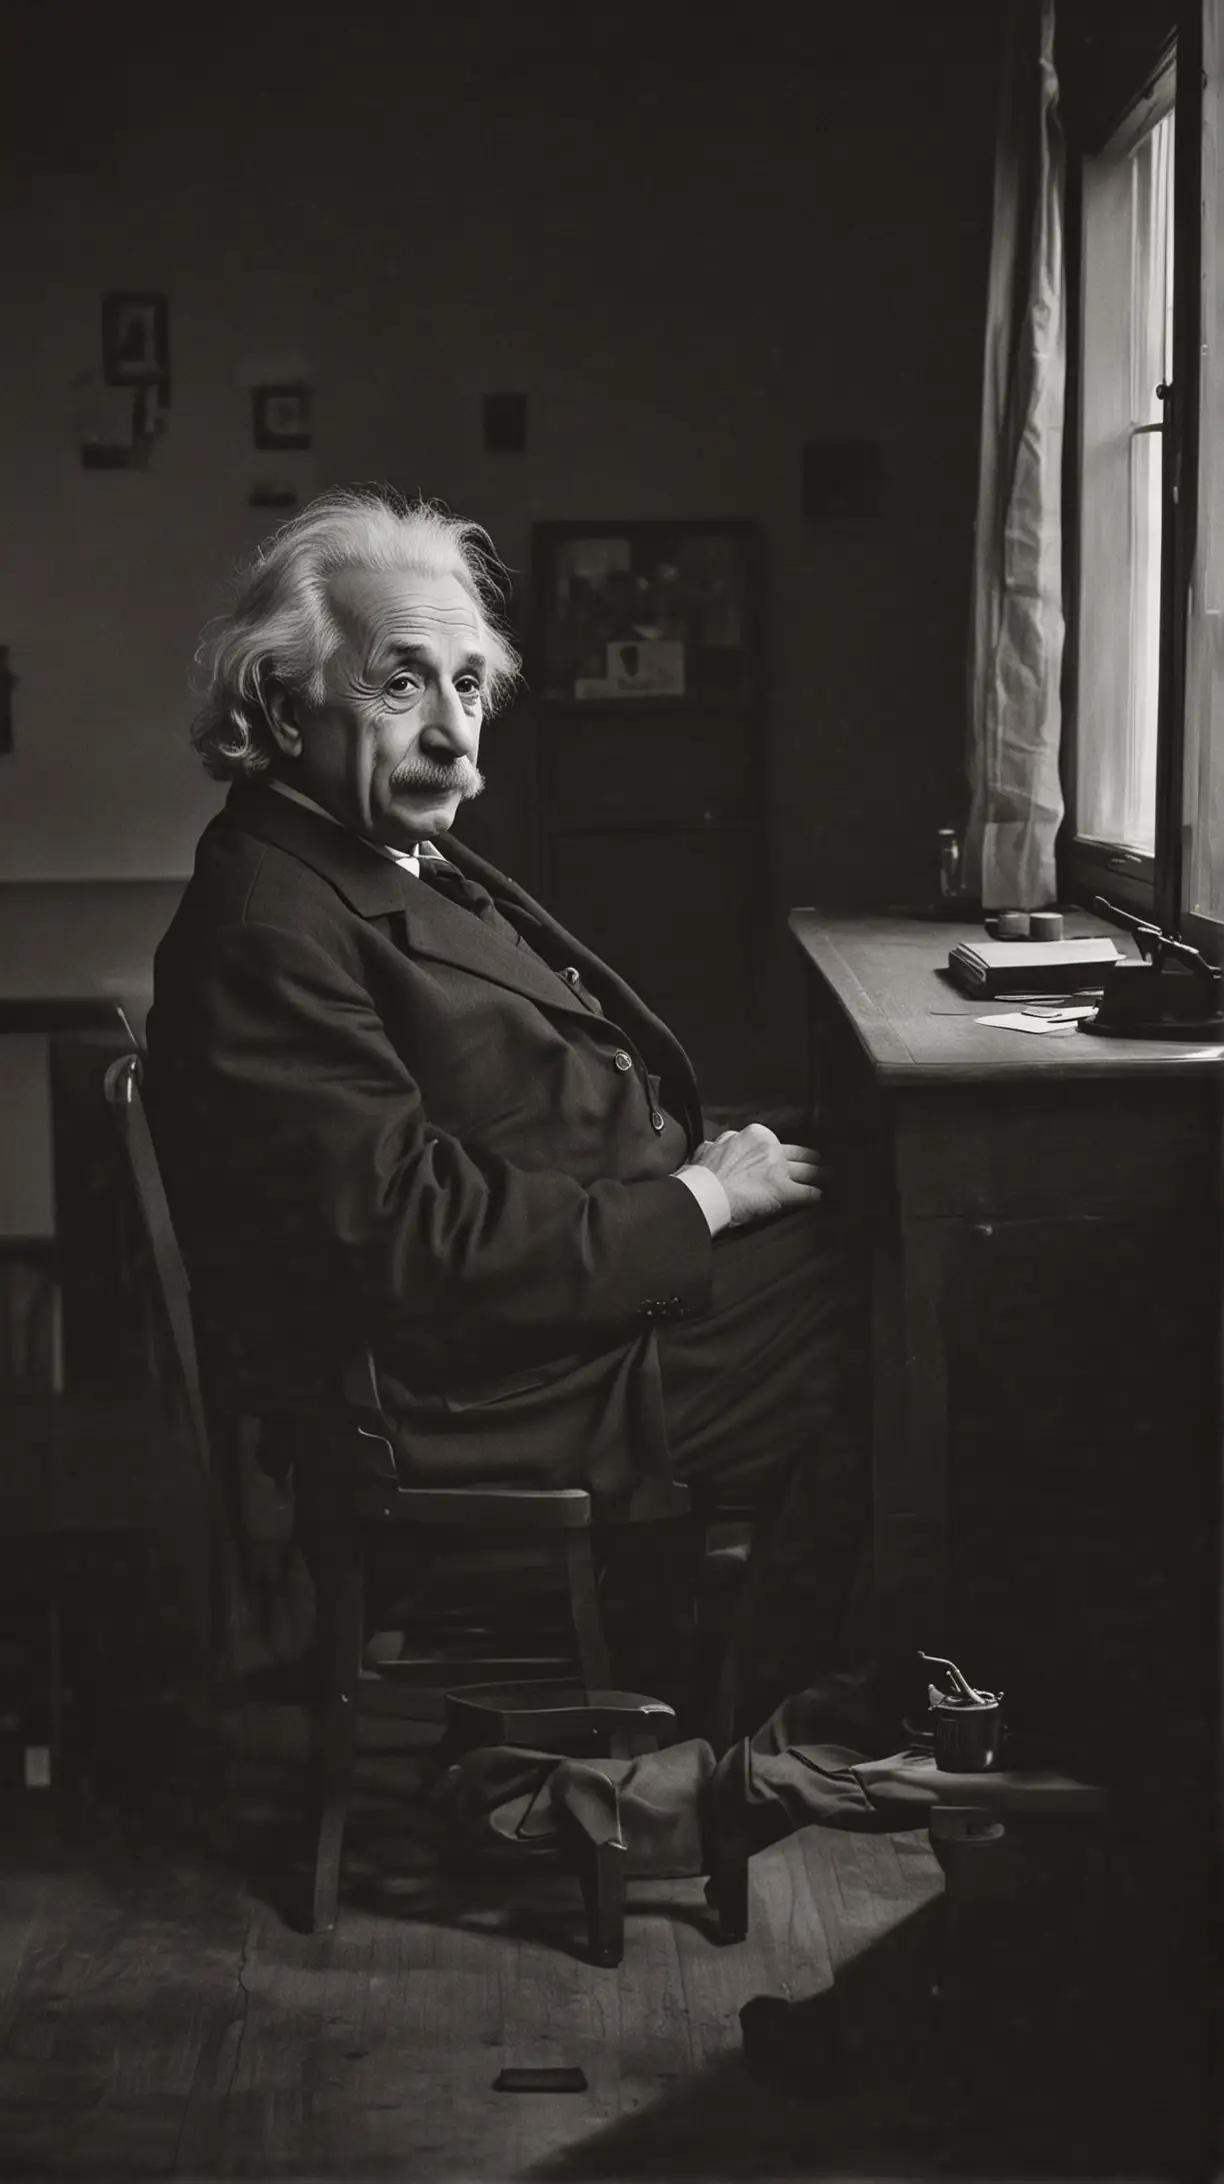 Albert Einstein Contemplating in Dimly Lit Room with View Outside